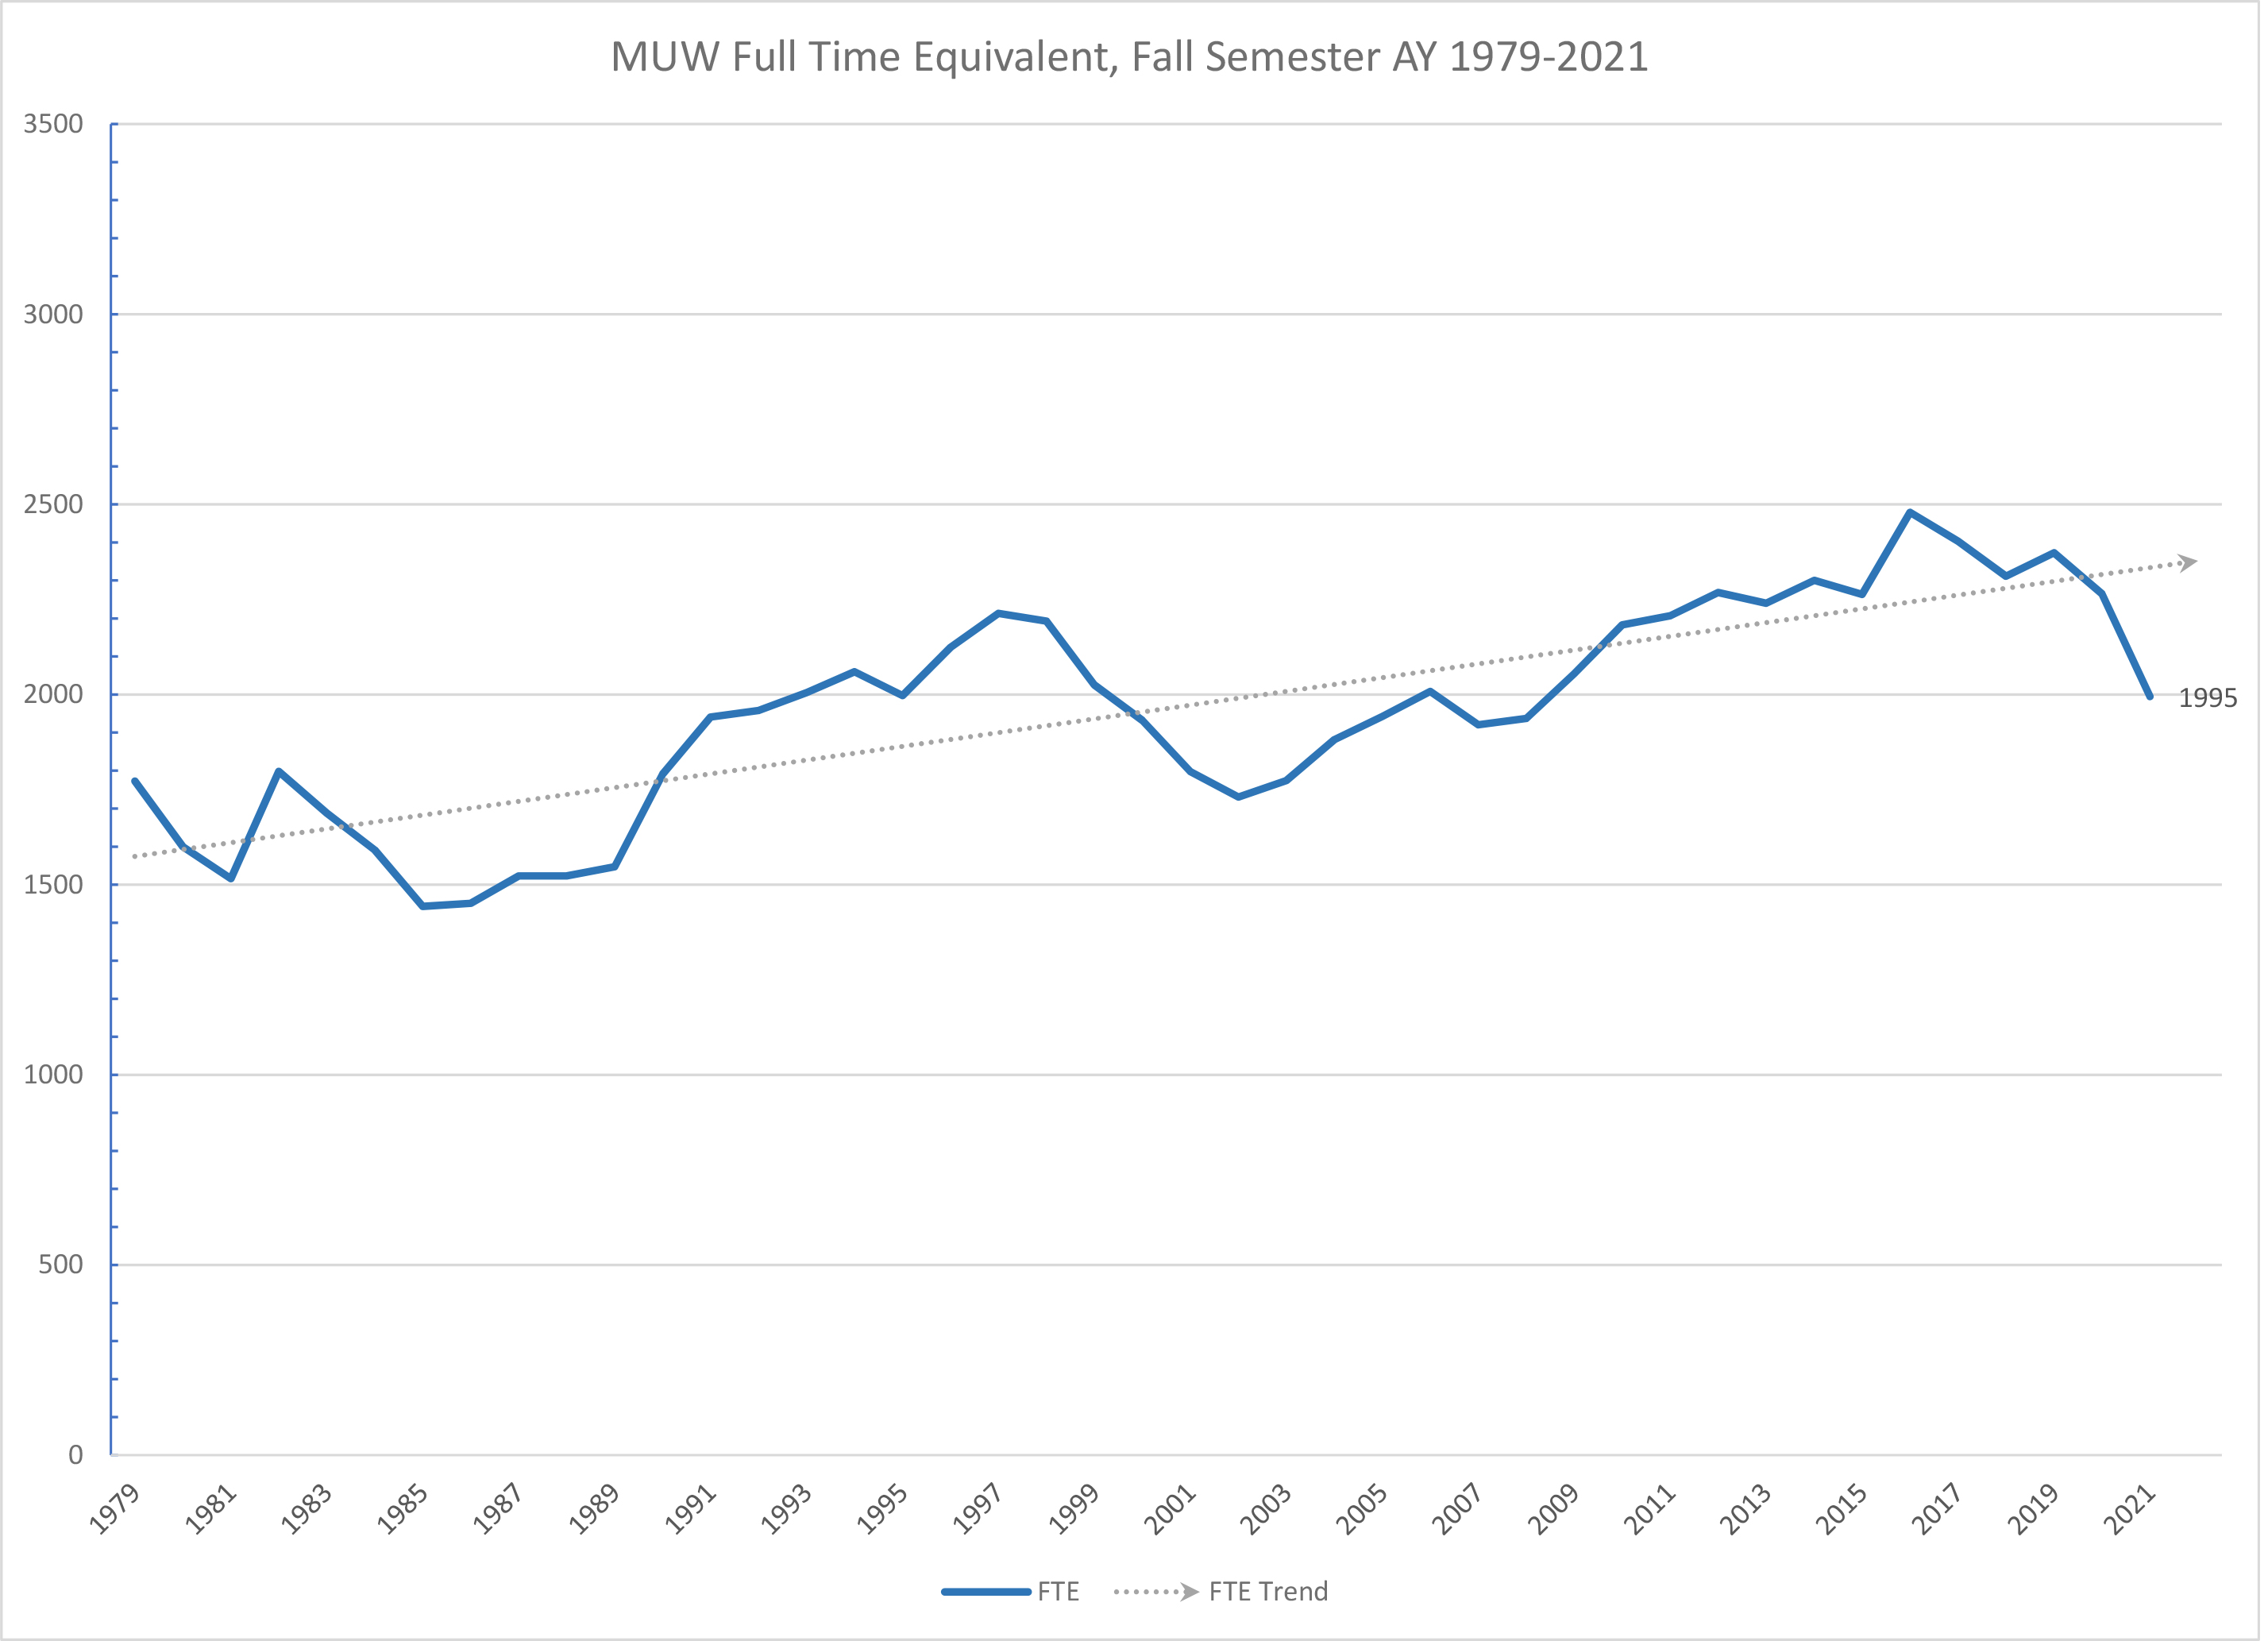 Chart: FTE 1979-2021 shows growth from 1772 to 1995 over forty three years